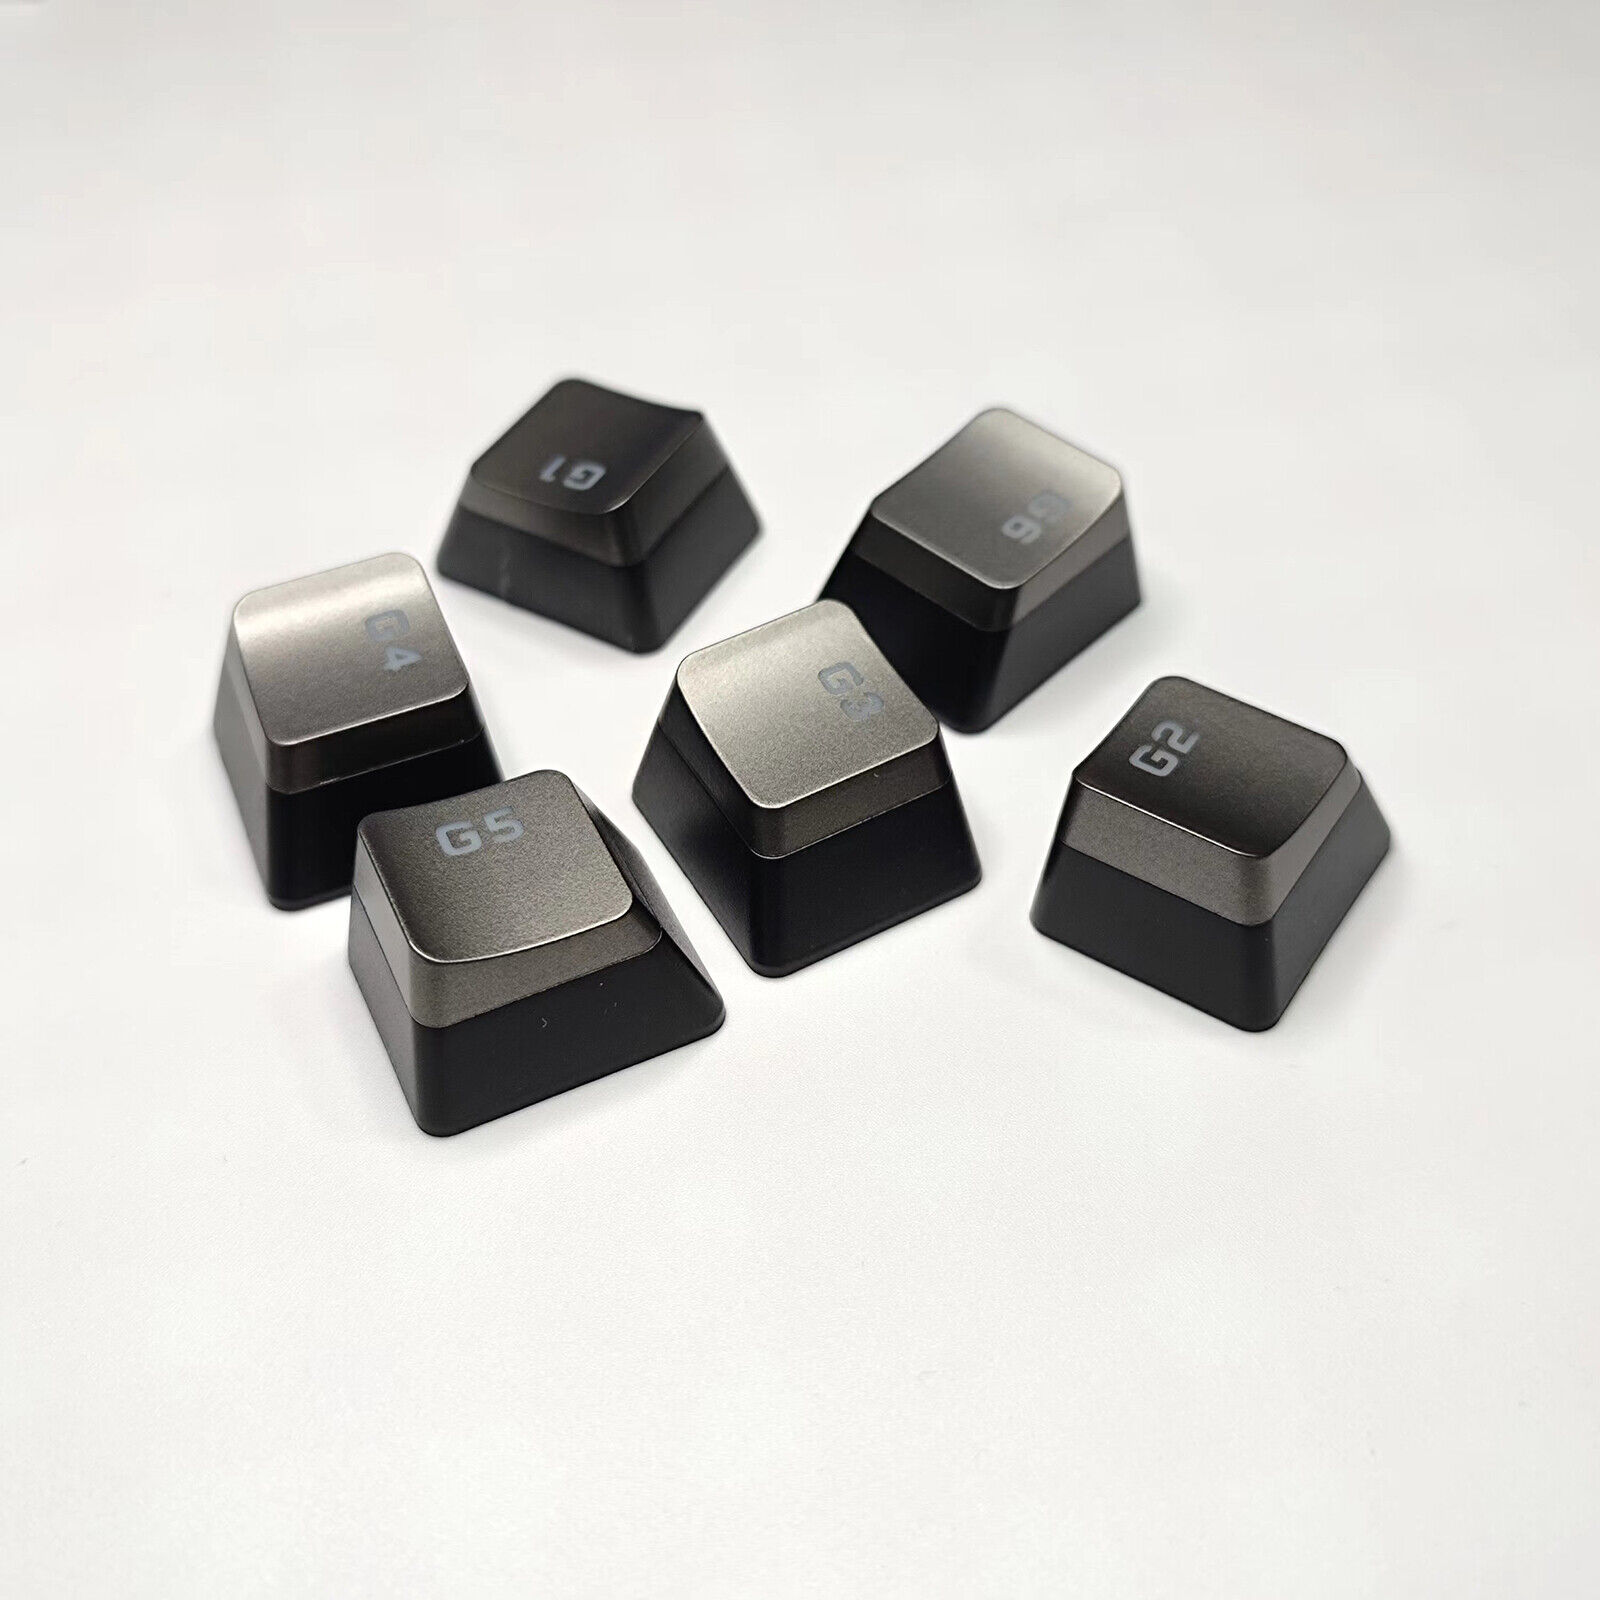 Keyboard Keycaps G1-G6 Key Caps Keyboard Replace Accessories for Corsair K100